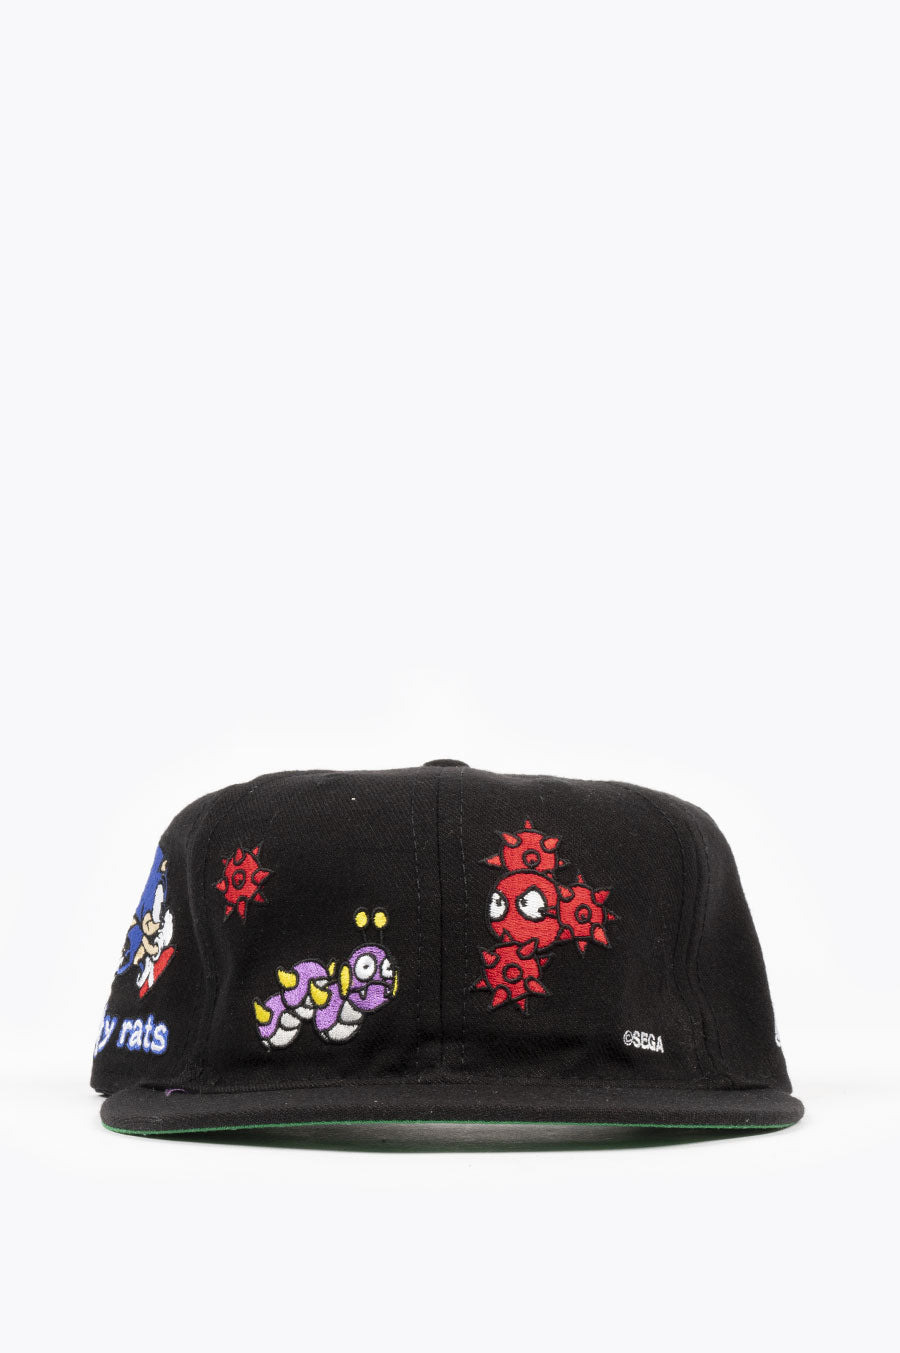 STRAY RATS X SONIC THE HEDGEHOG BADNIK FITTED HAT BLACK